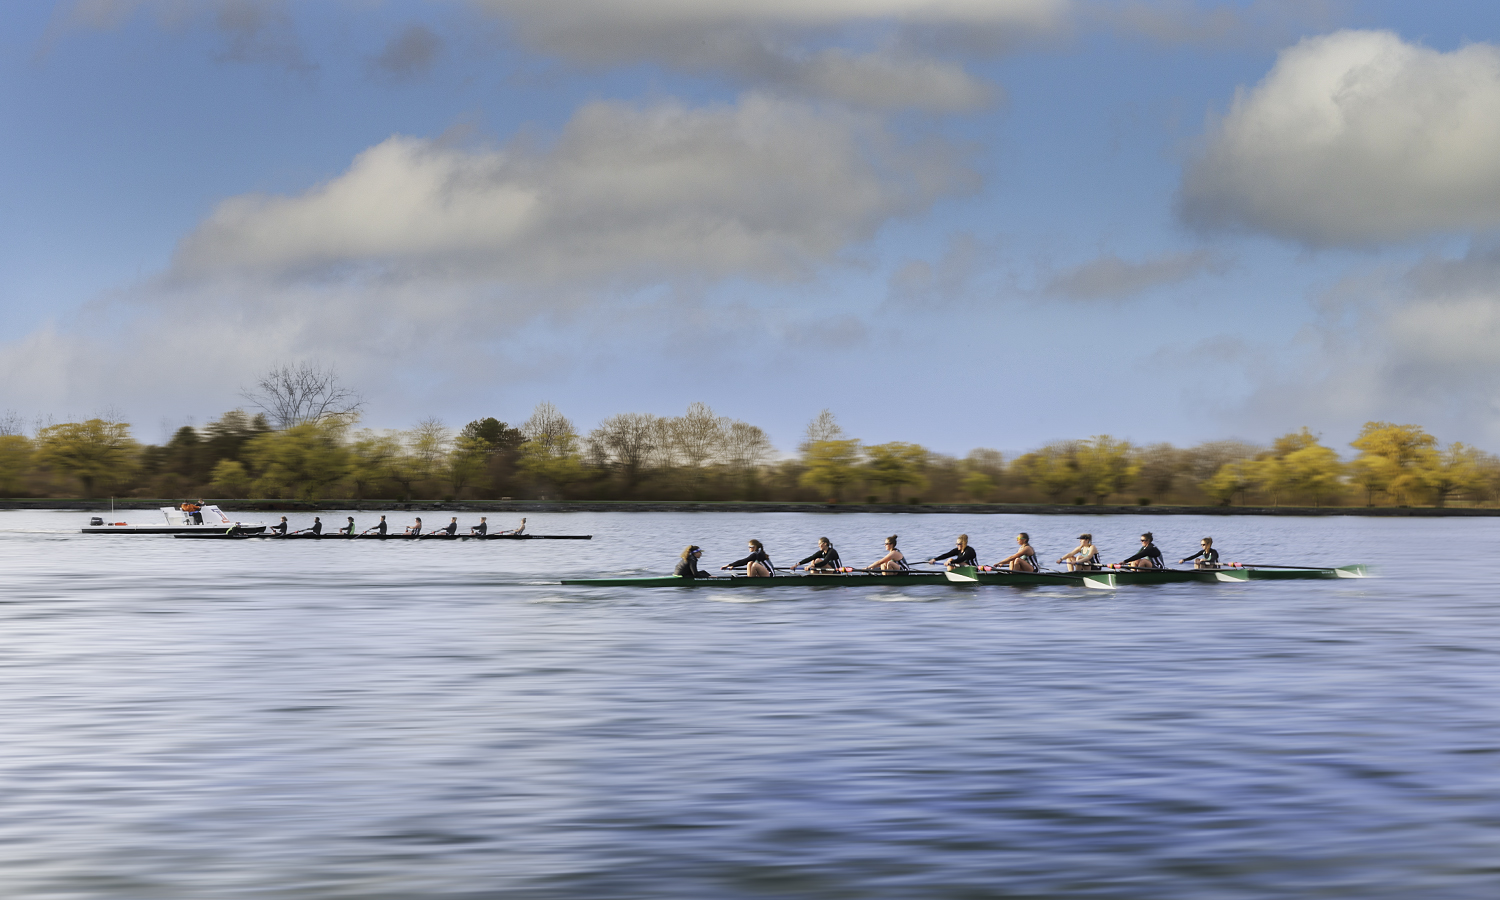 The William Smith rowing team practices on Seneca Lake before heading to Saratoga Springs for the 2023 Liberty League Championship and the New York State Championship.